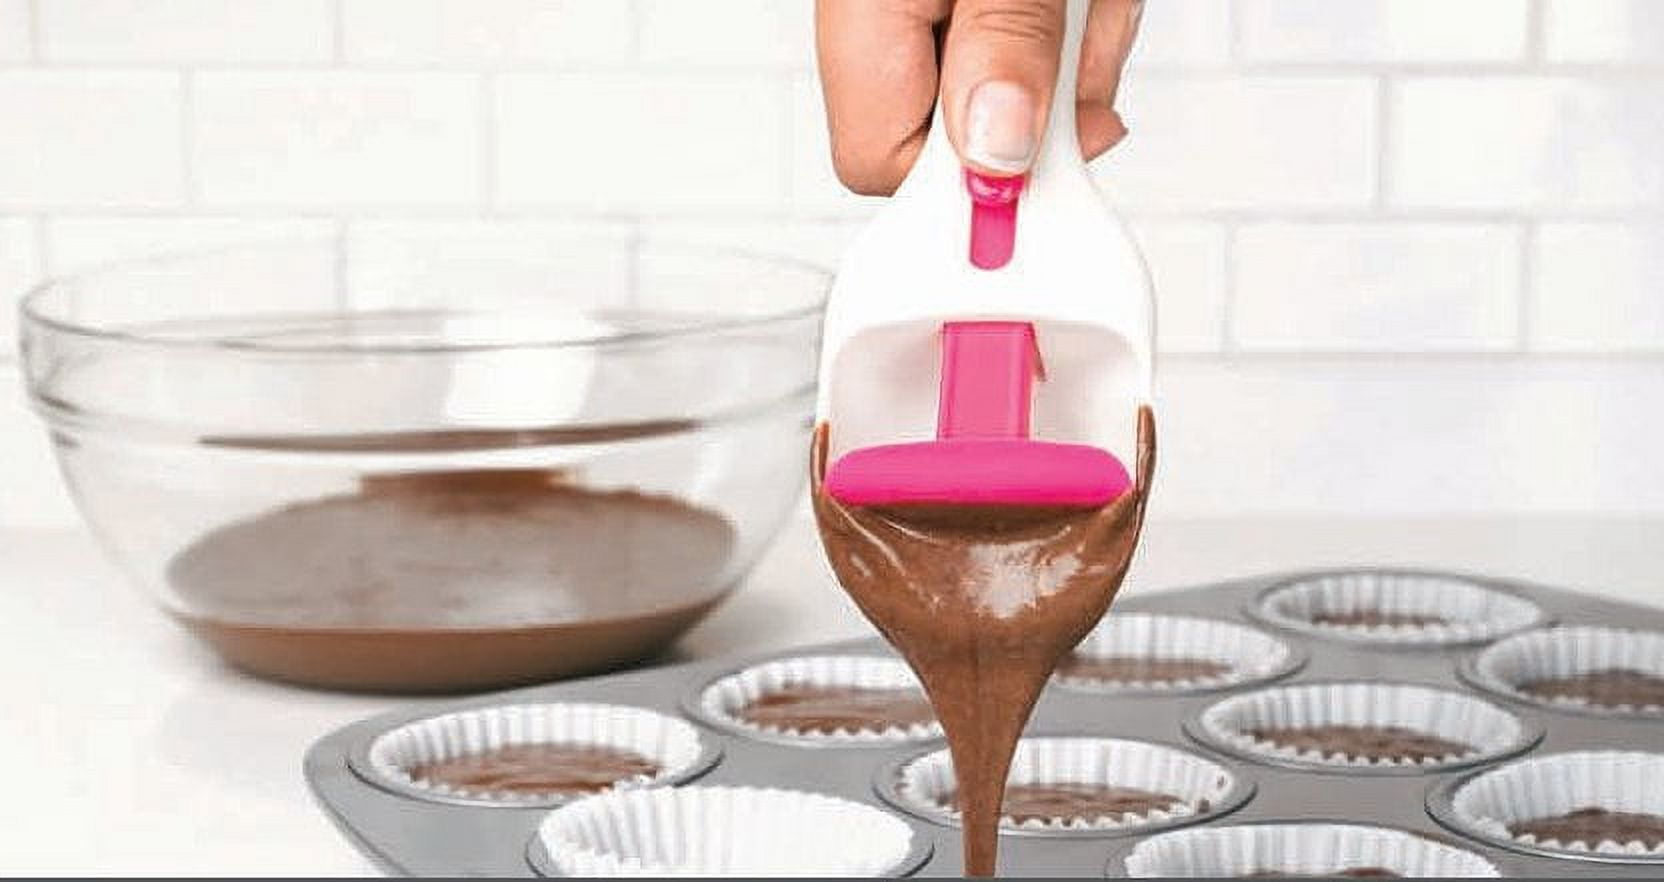 Tolovo Muffin and Cupcake Batter Scoop - Sold by Miles Kimball